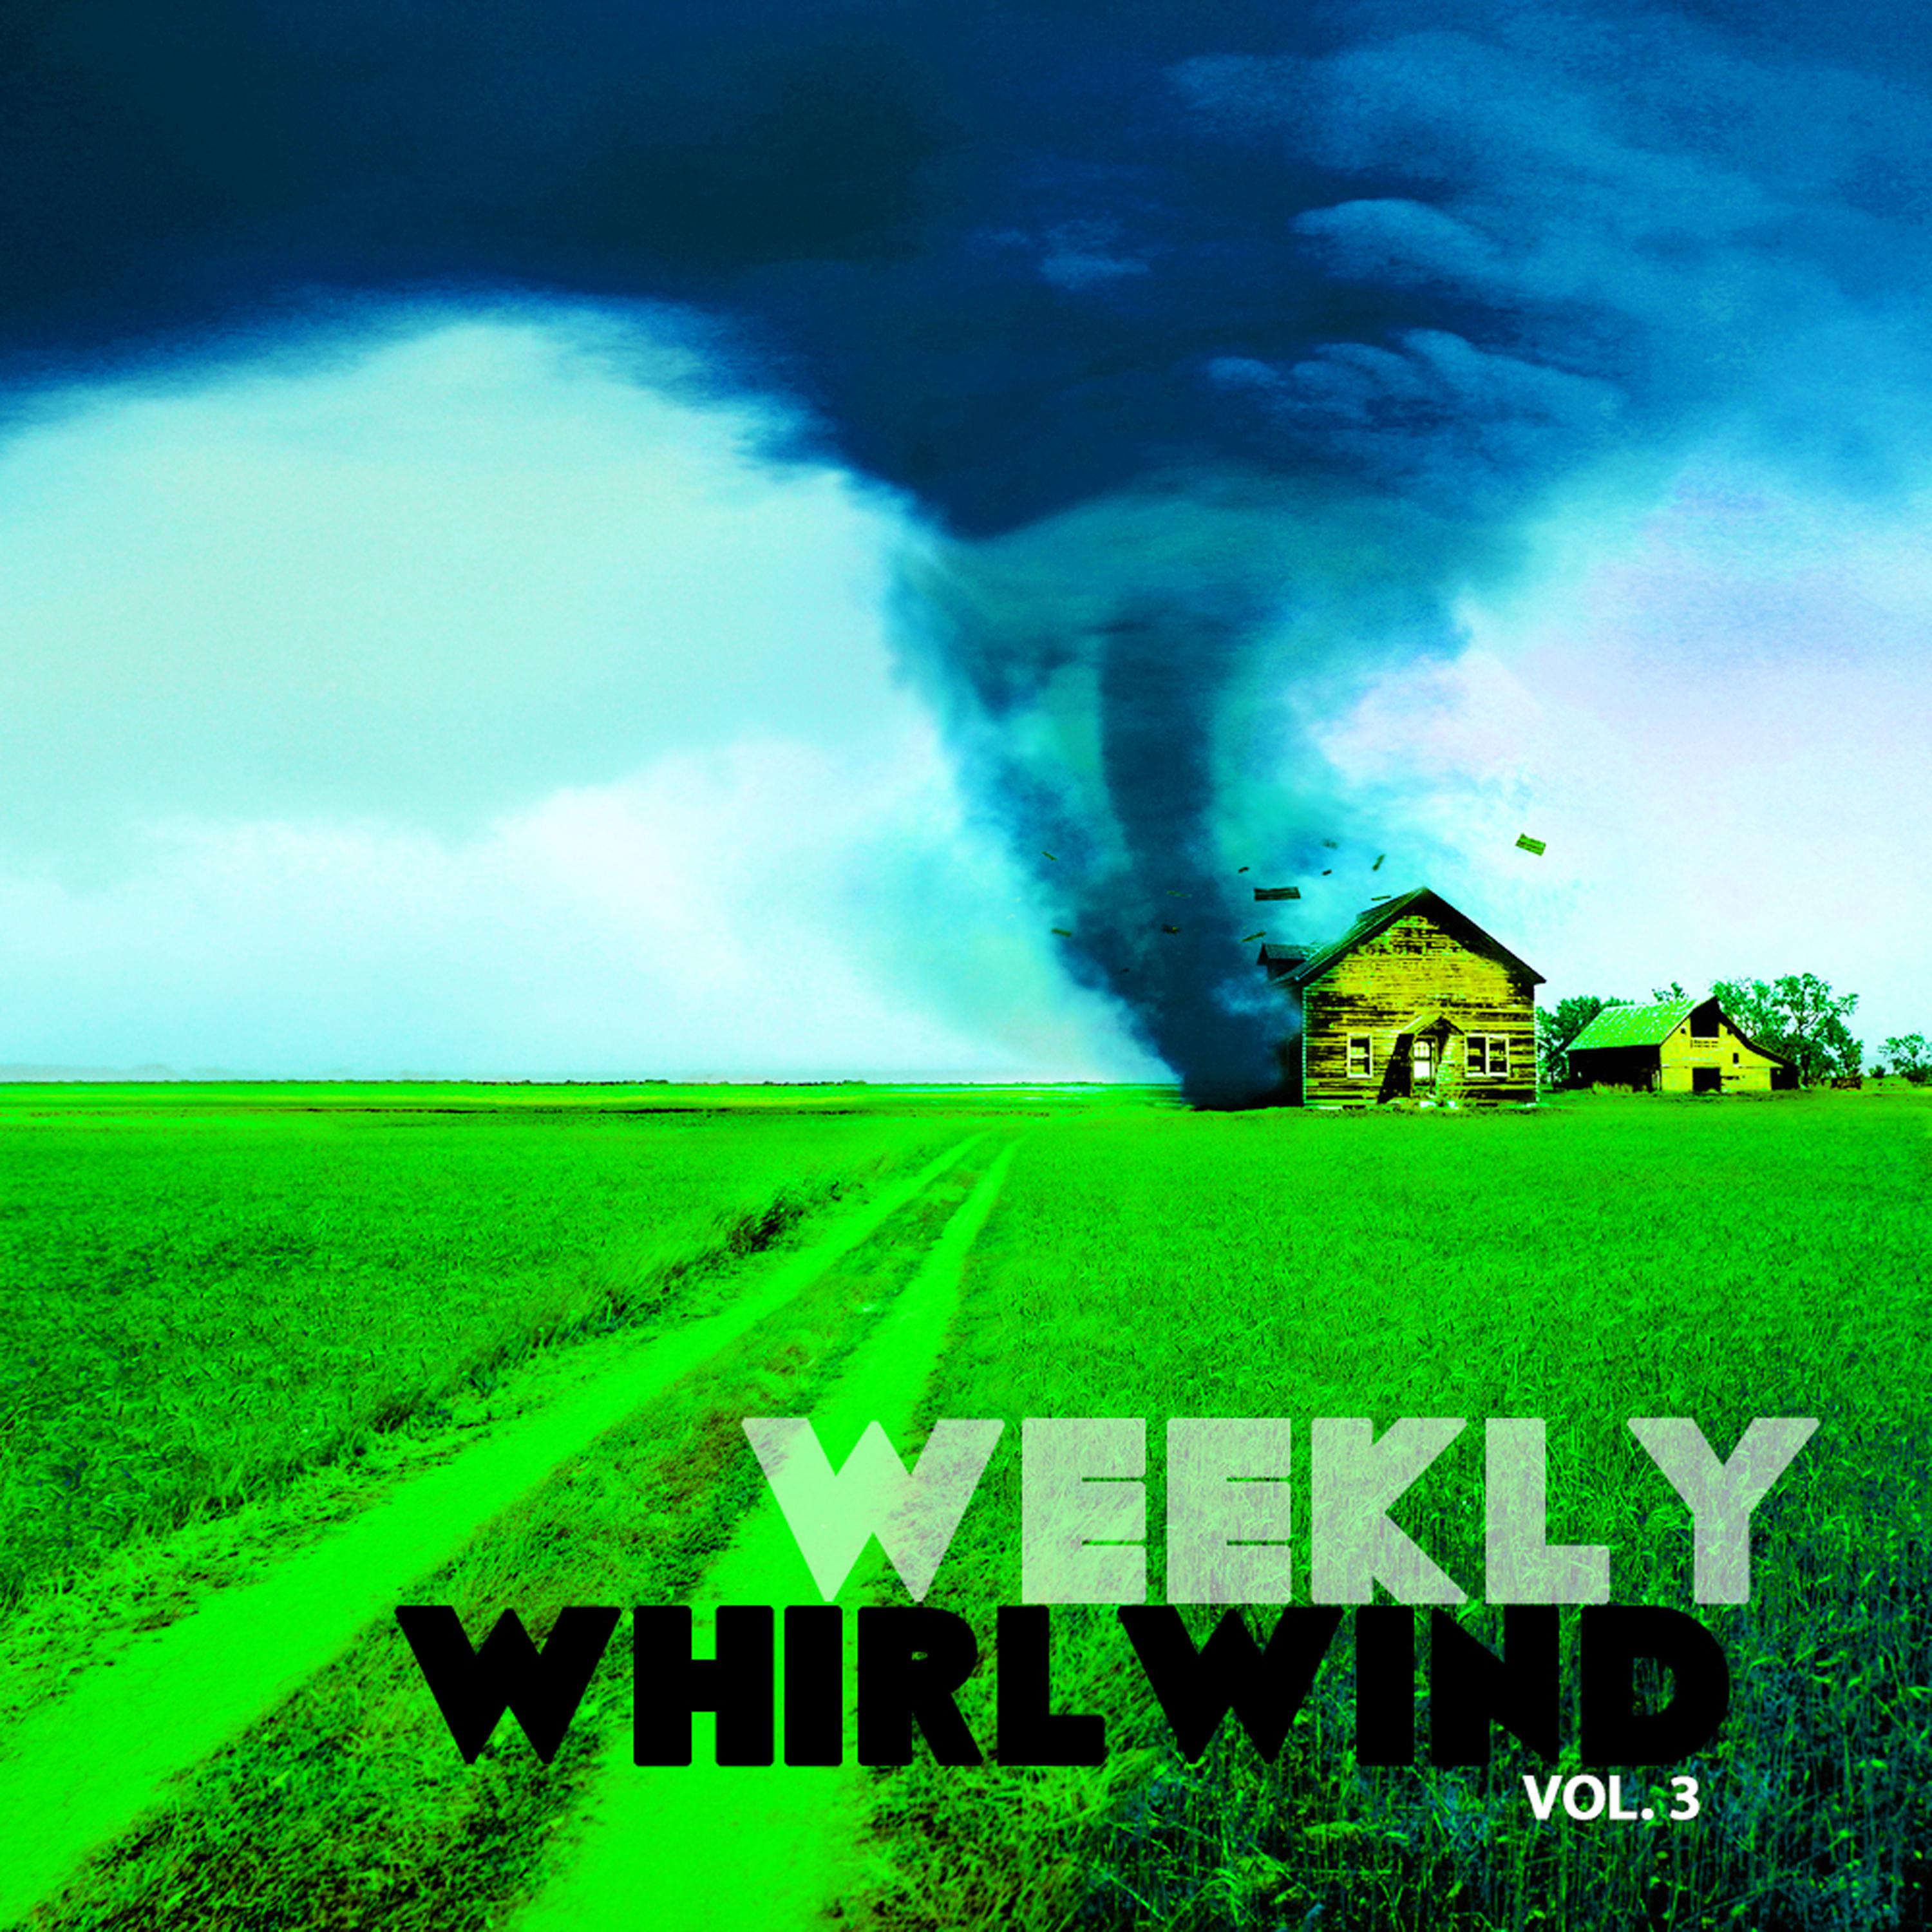 Weekly Whirlwind, Vol. 3